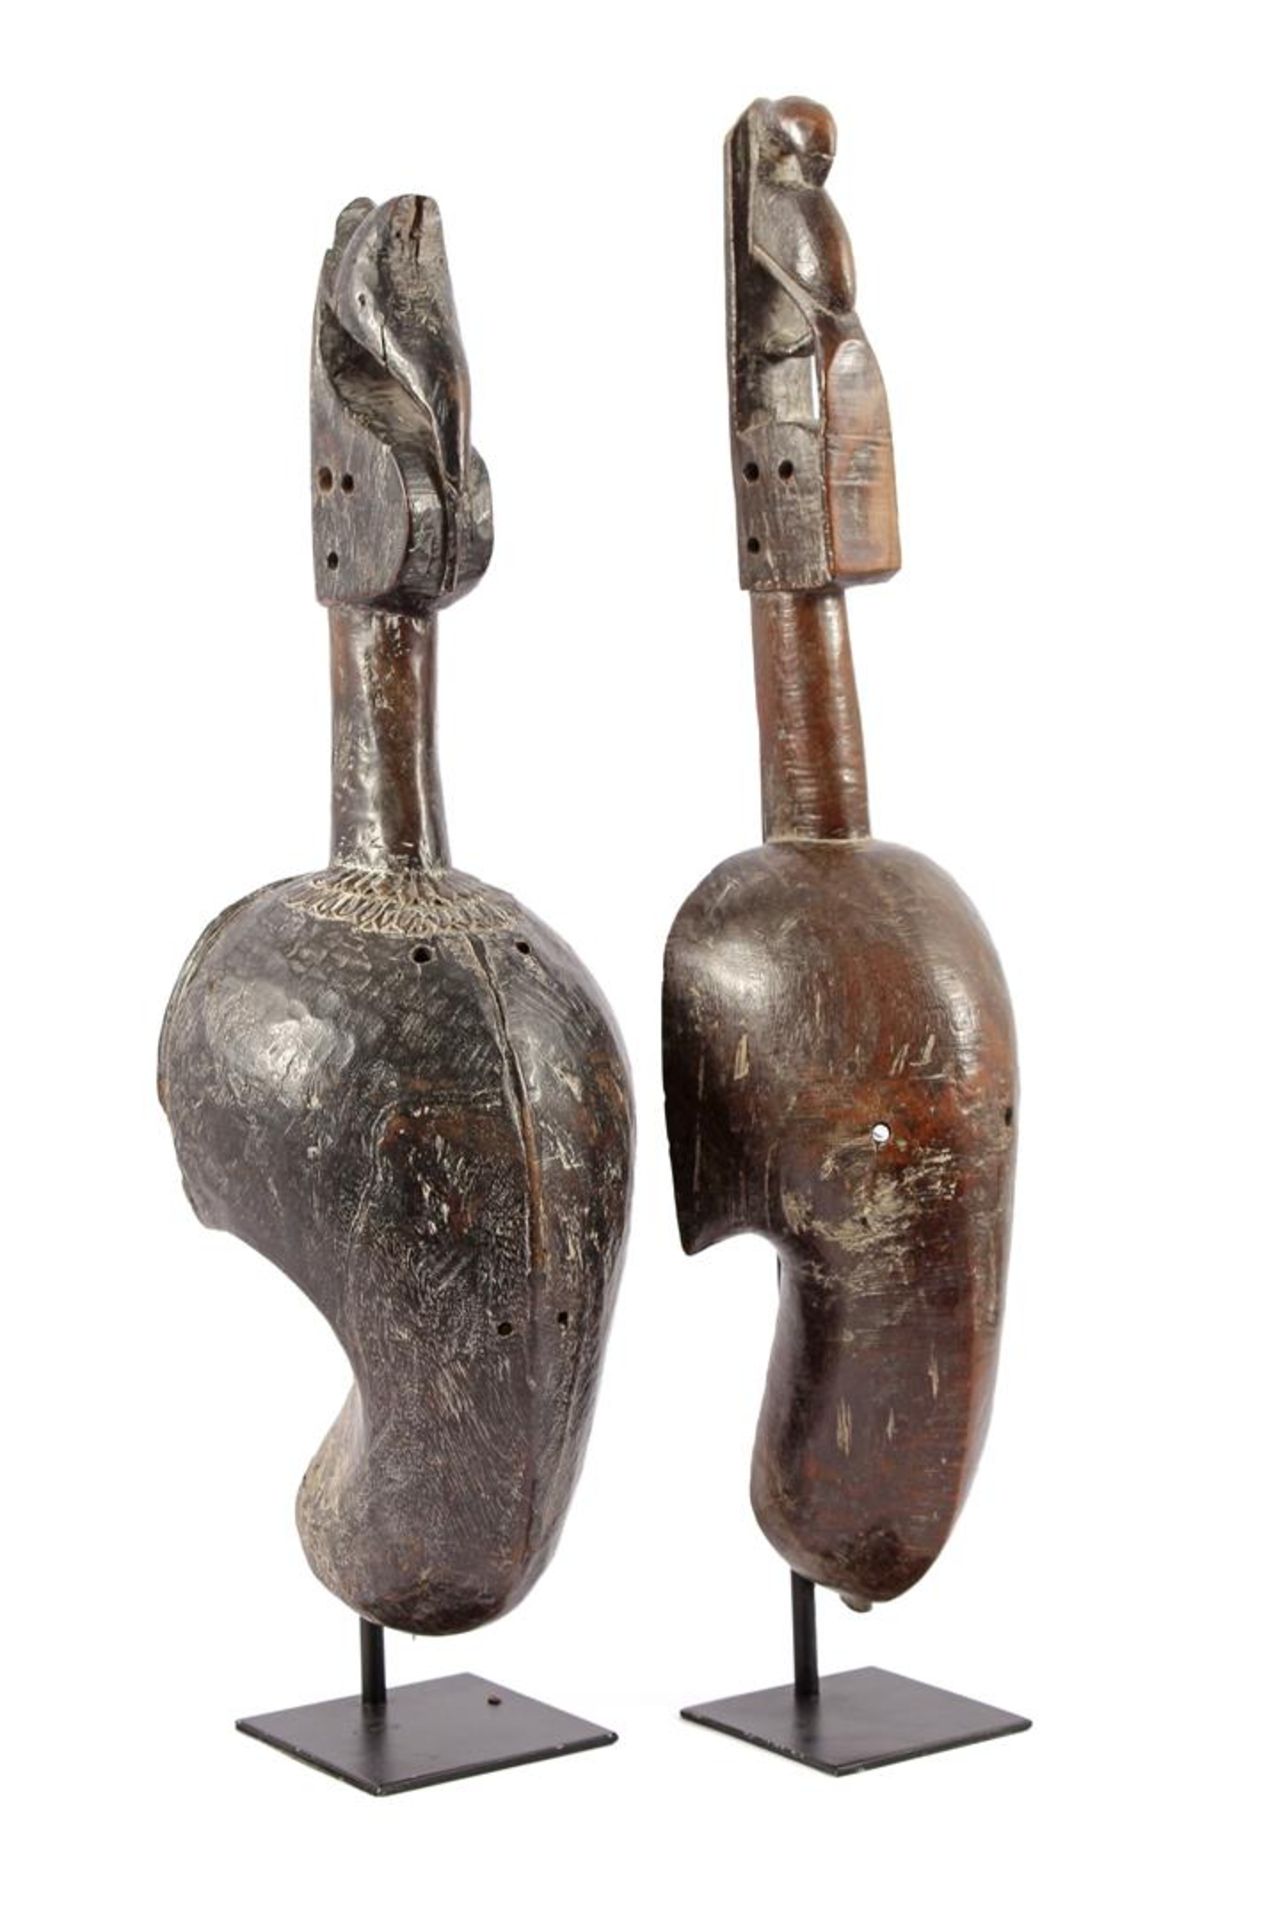 2 wooden elongated African masks on metal stand, 64 and 60 cm high